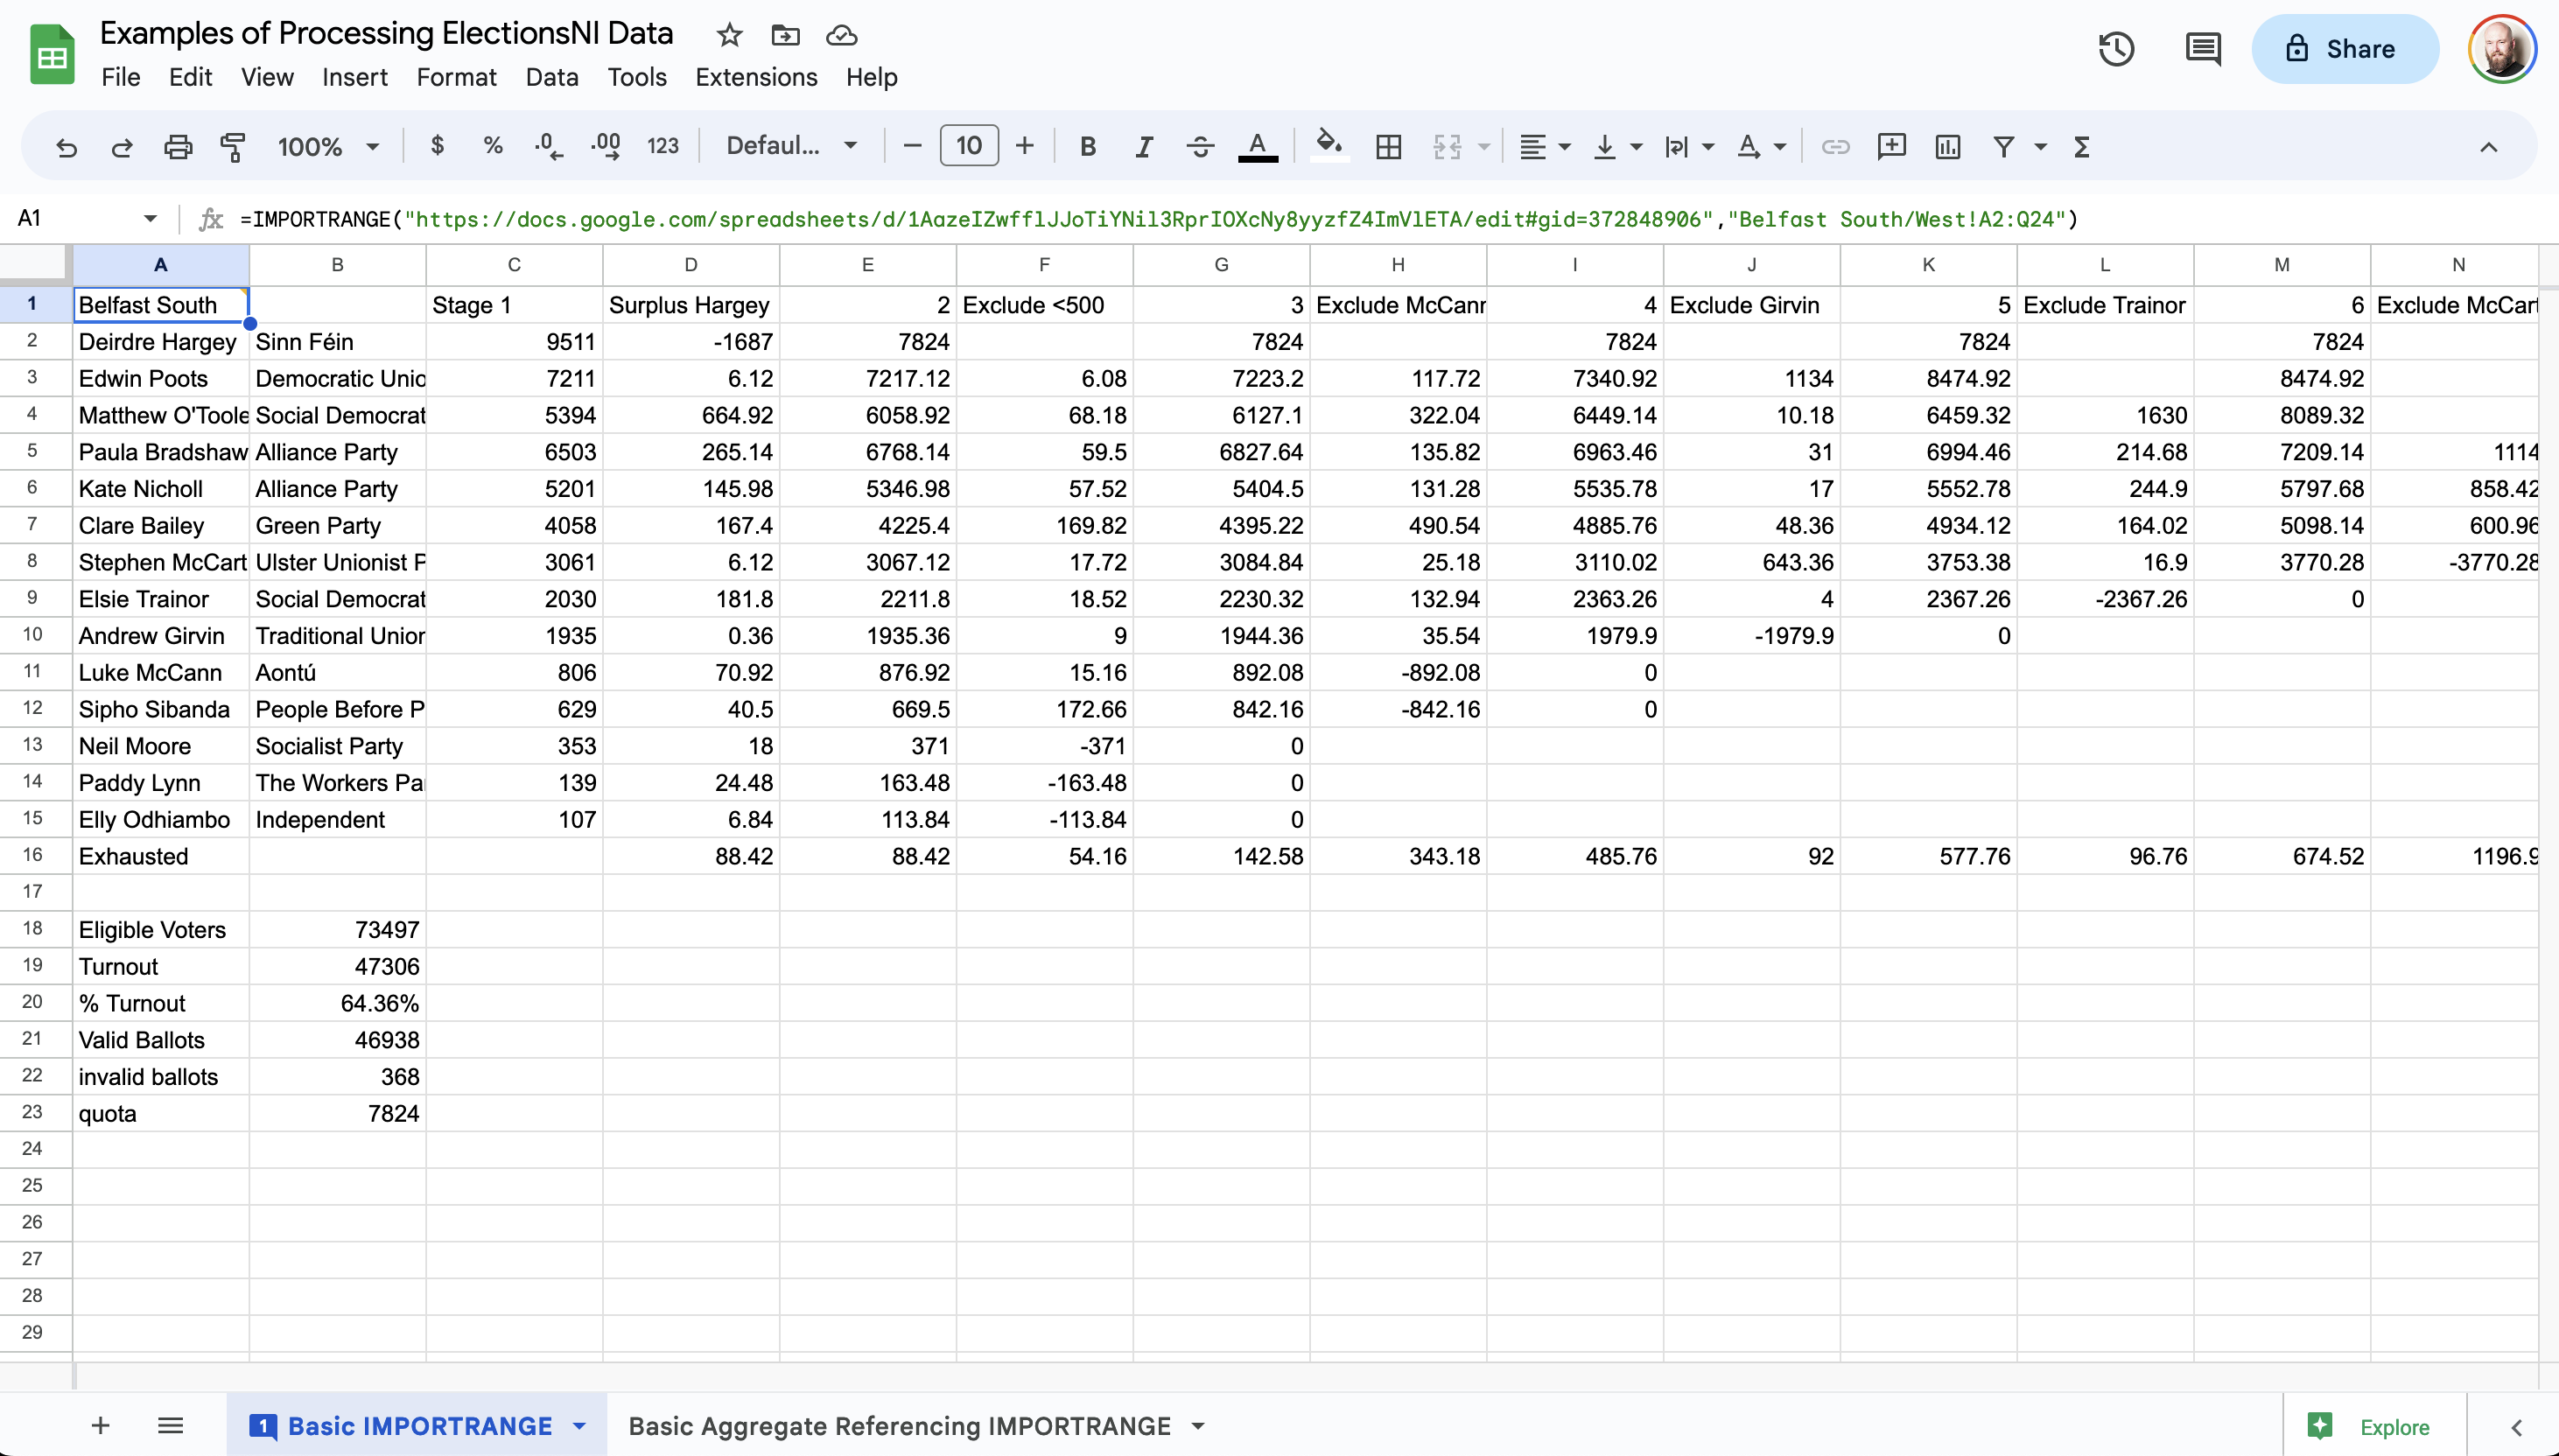 Image of Imported Spreadsheet showing separated results for the Belfast South Assembly Election in 2022